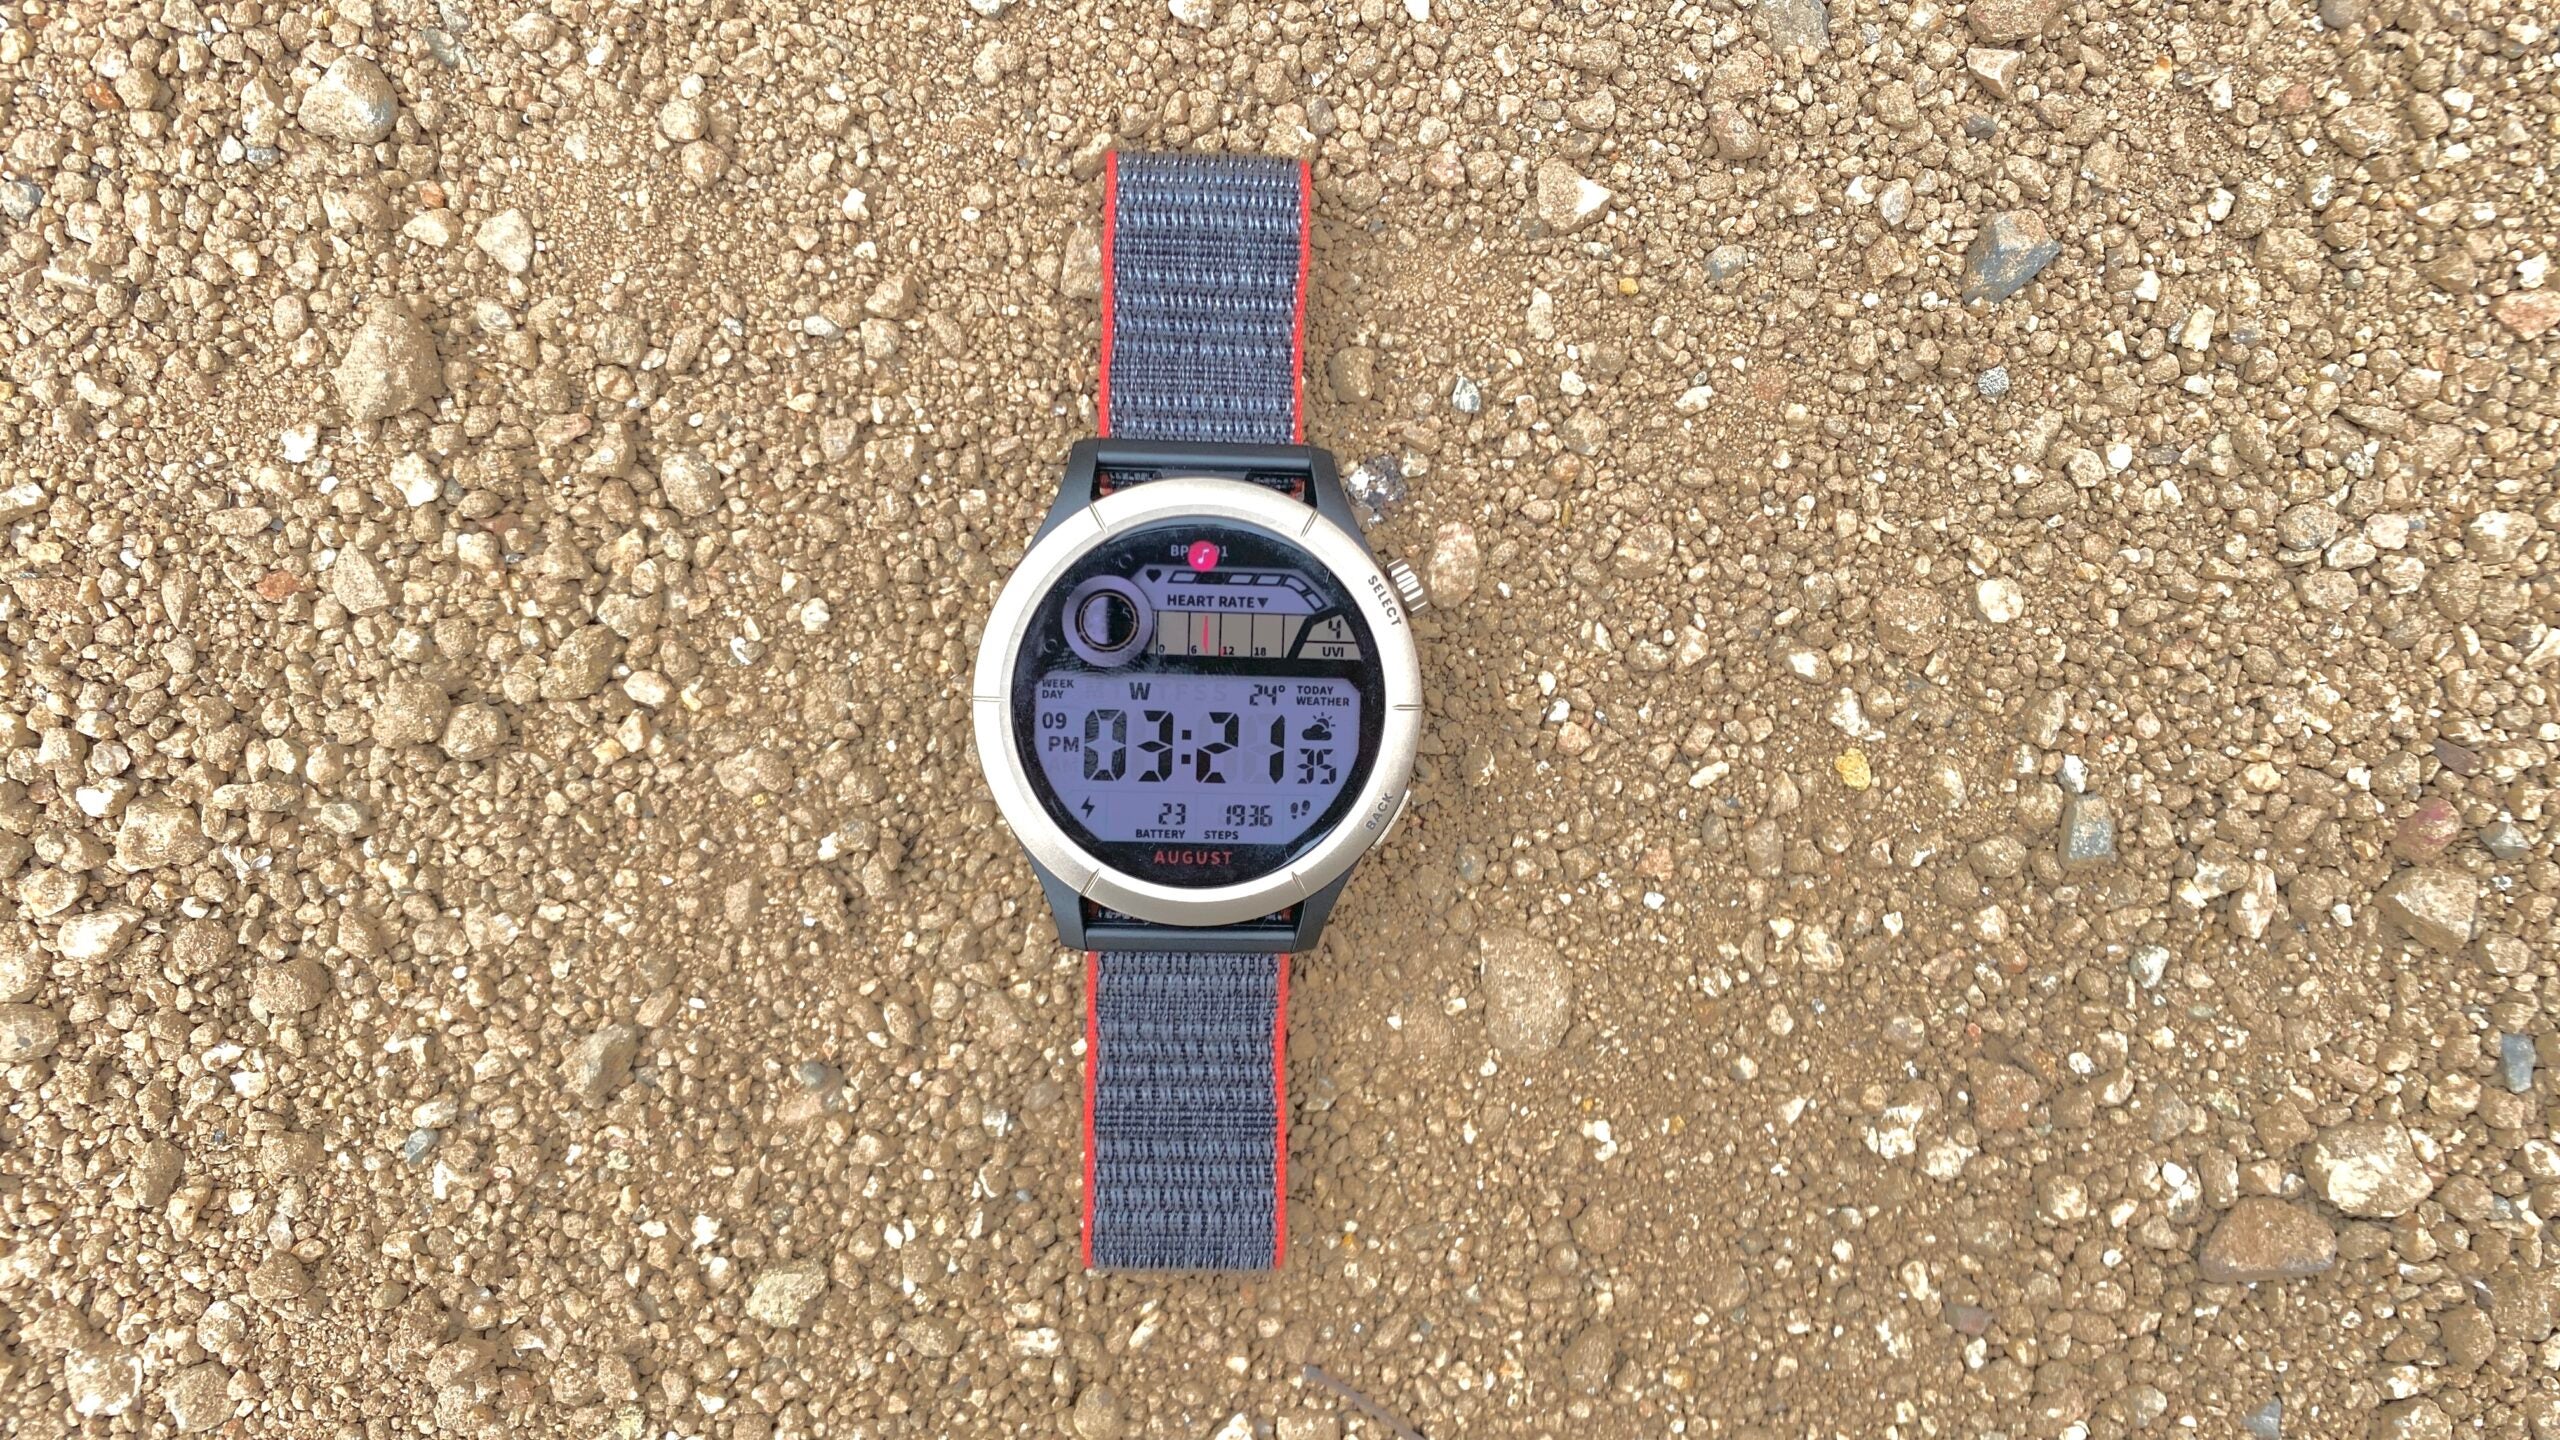 Amazfit Cheetah Pro review: A Garmin Forerunner Lite with more